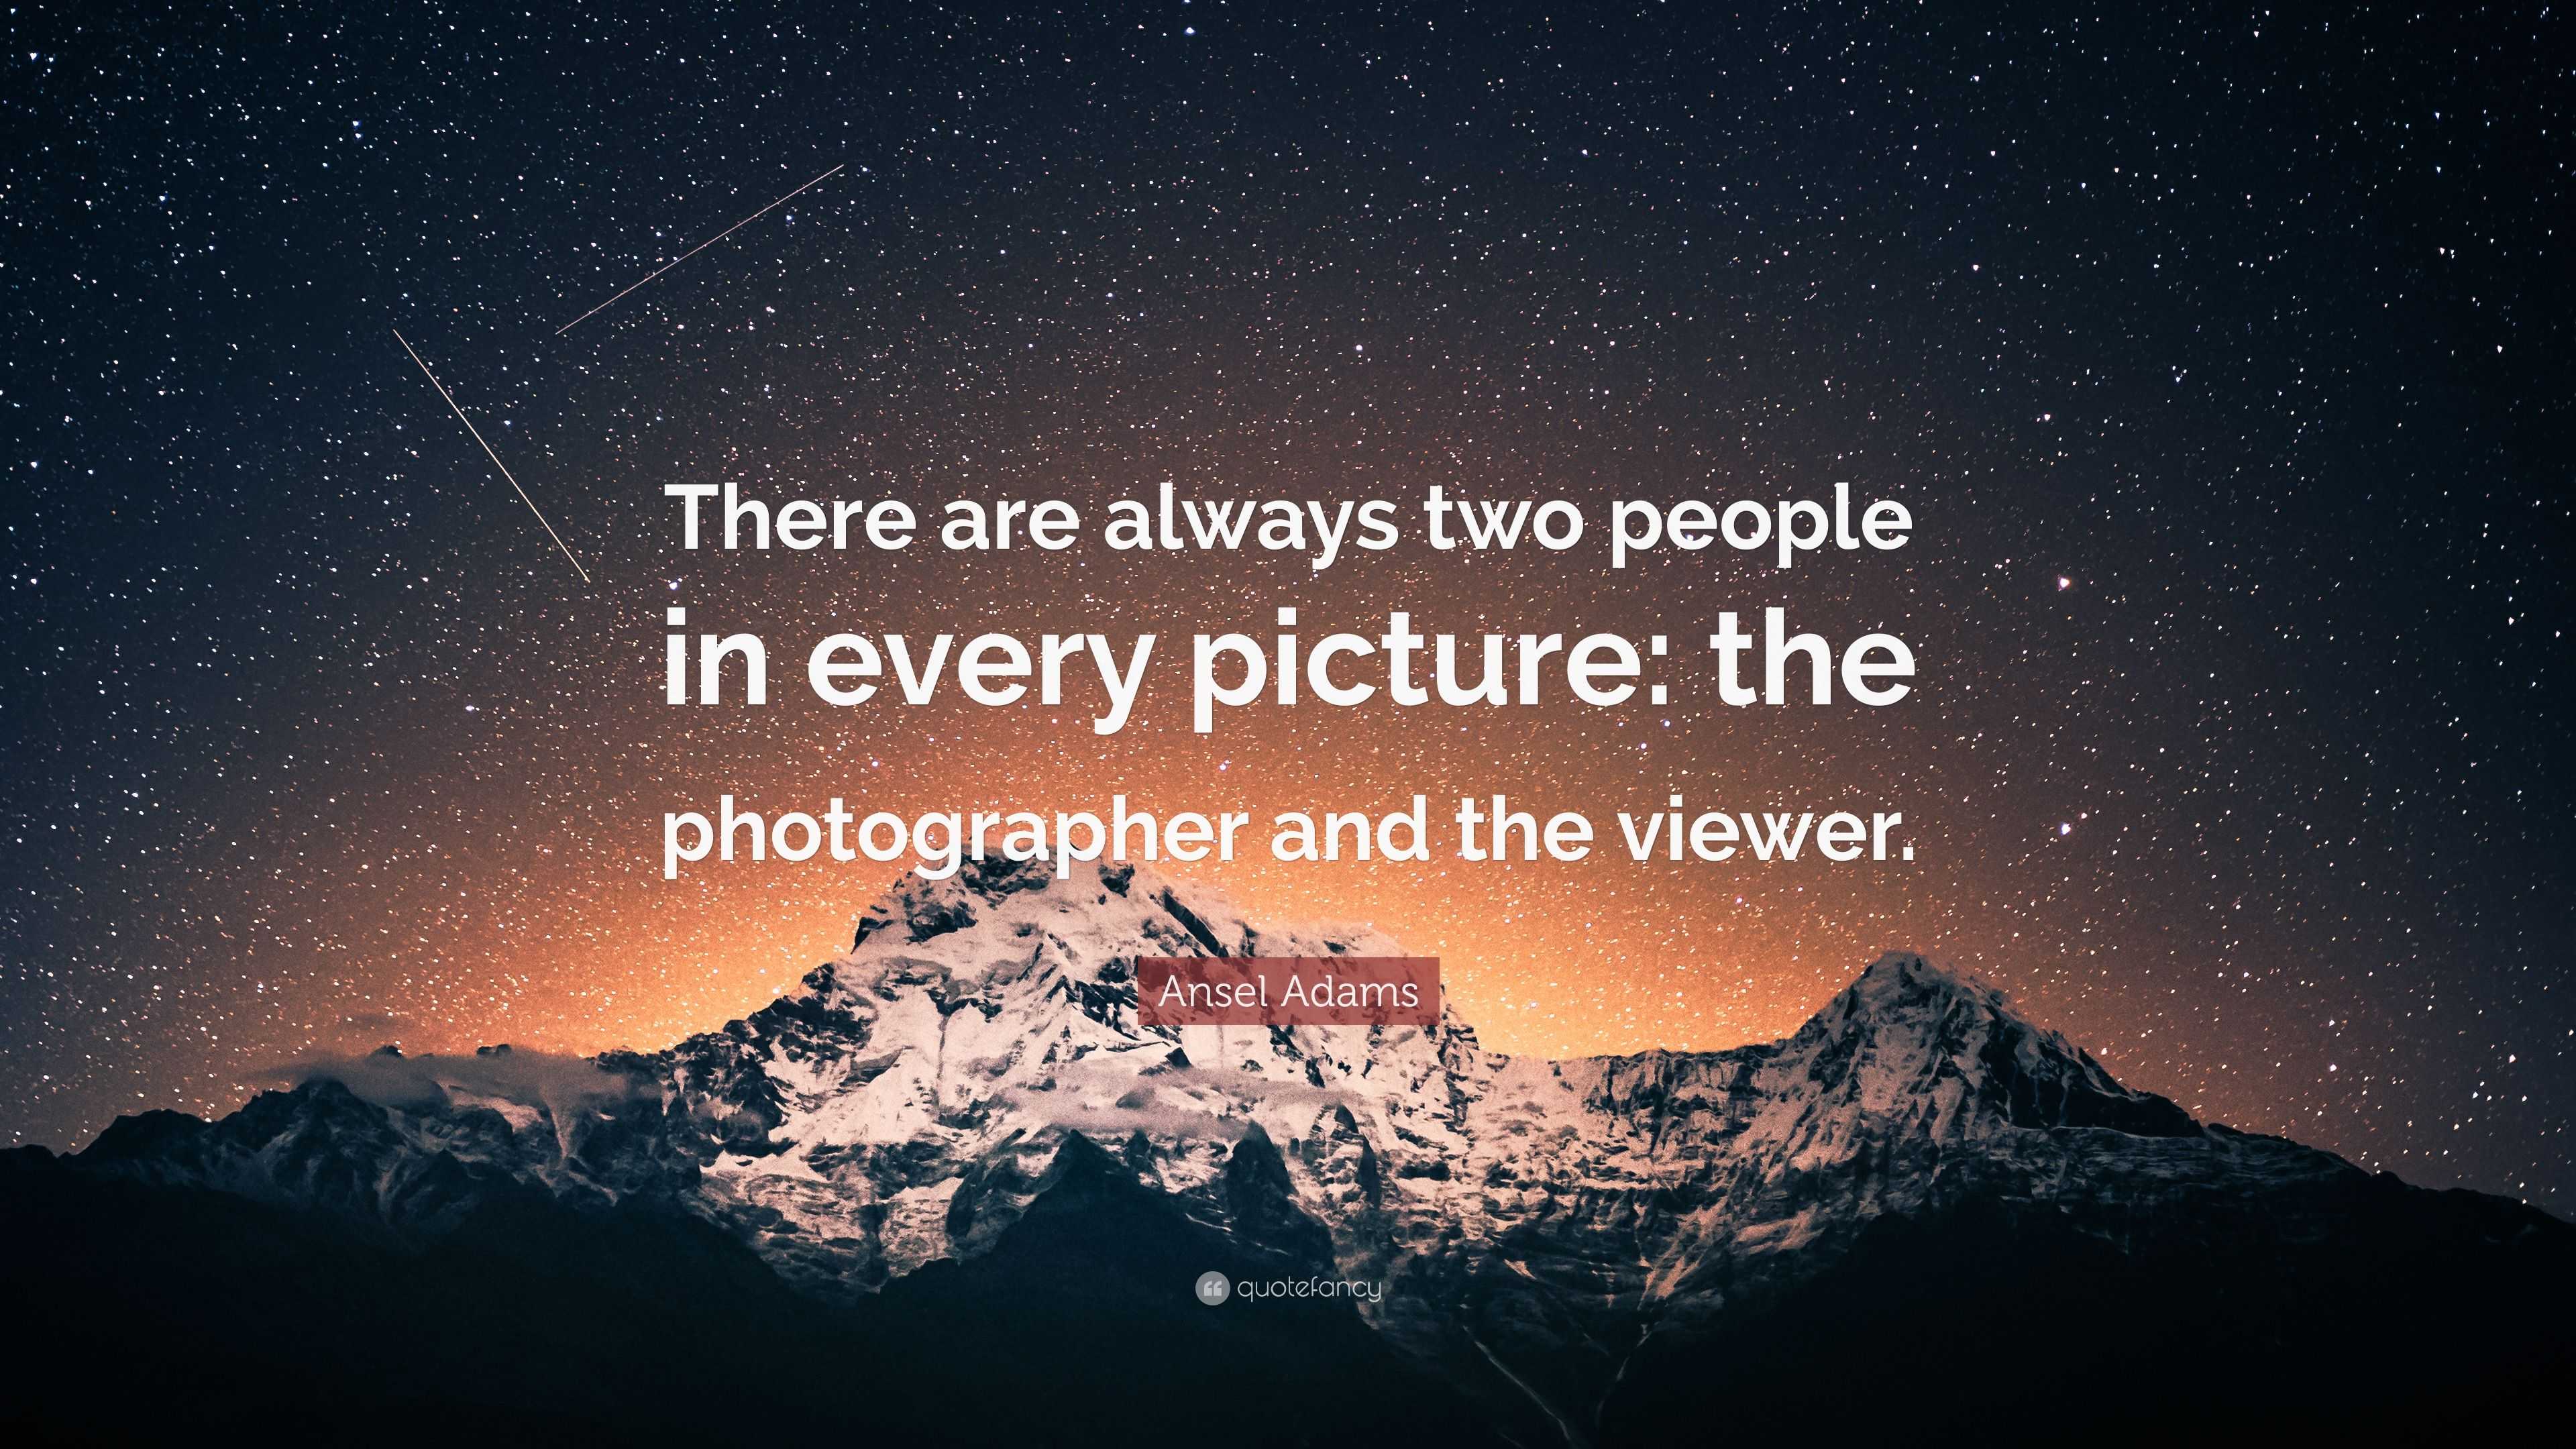 Ansel Adams Quote: “There are always two people in every picture: the ...